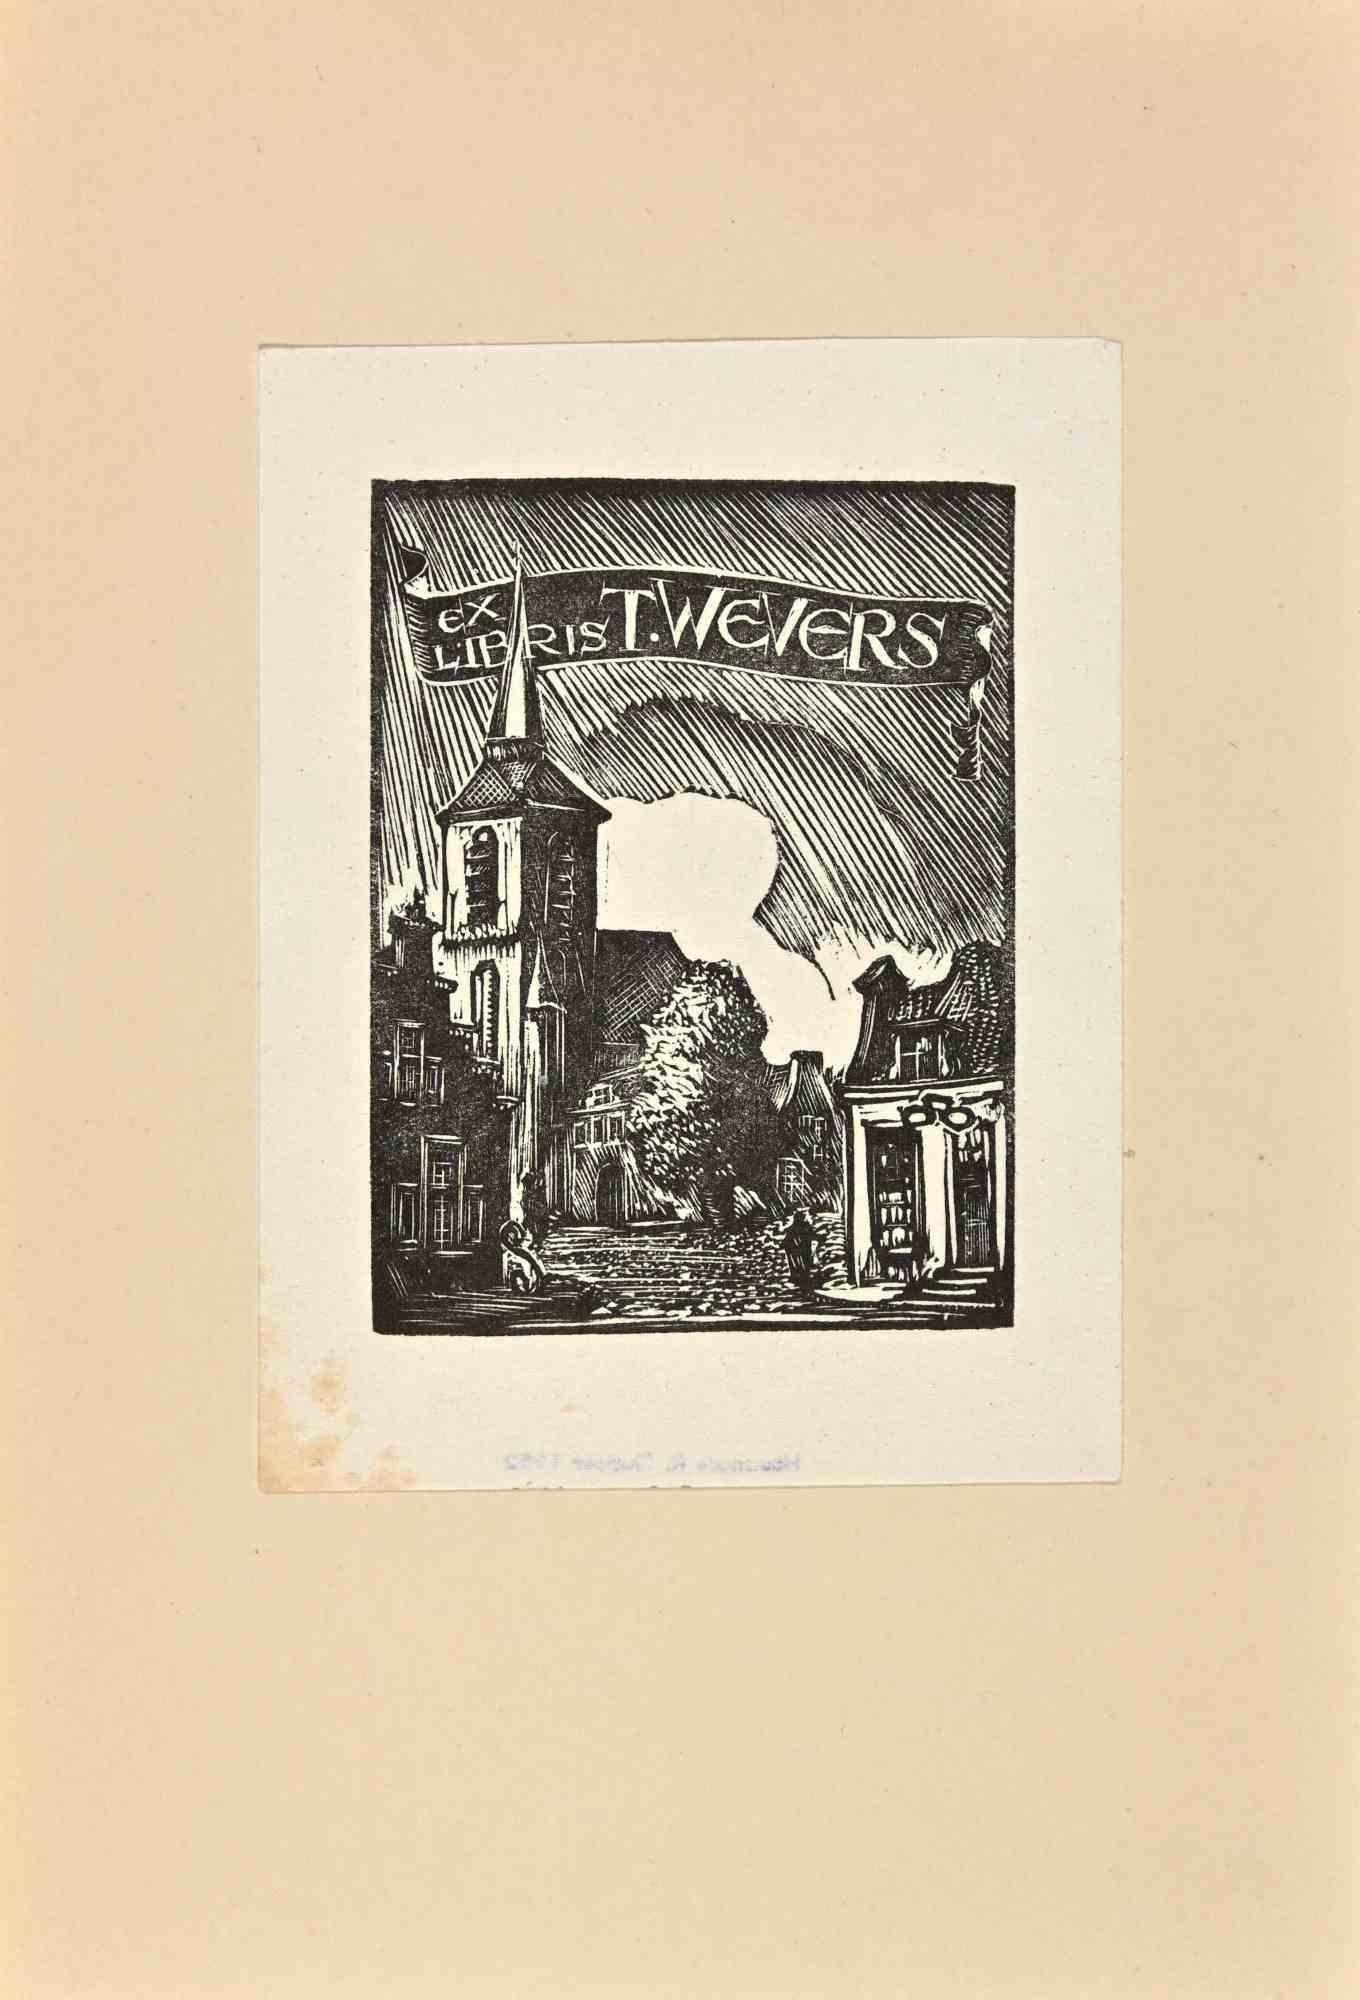 Ex Libris - T. Wevers is a Modern Artwork realized in 1952, by Herbert Ott.

Ex Libris. B/W woodcut on ivory paper.

The work is glued on ivory cardboard.

Total dimensions: 21x 14.5 cm.

Good conditions except for a small spot on the left